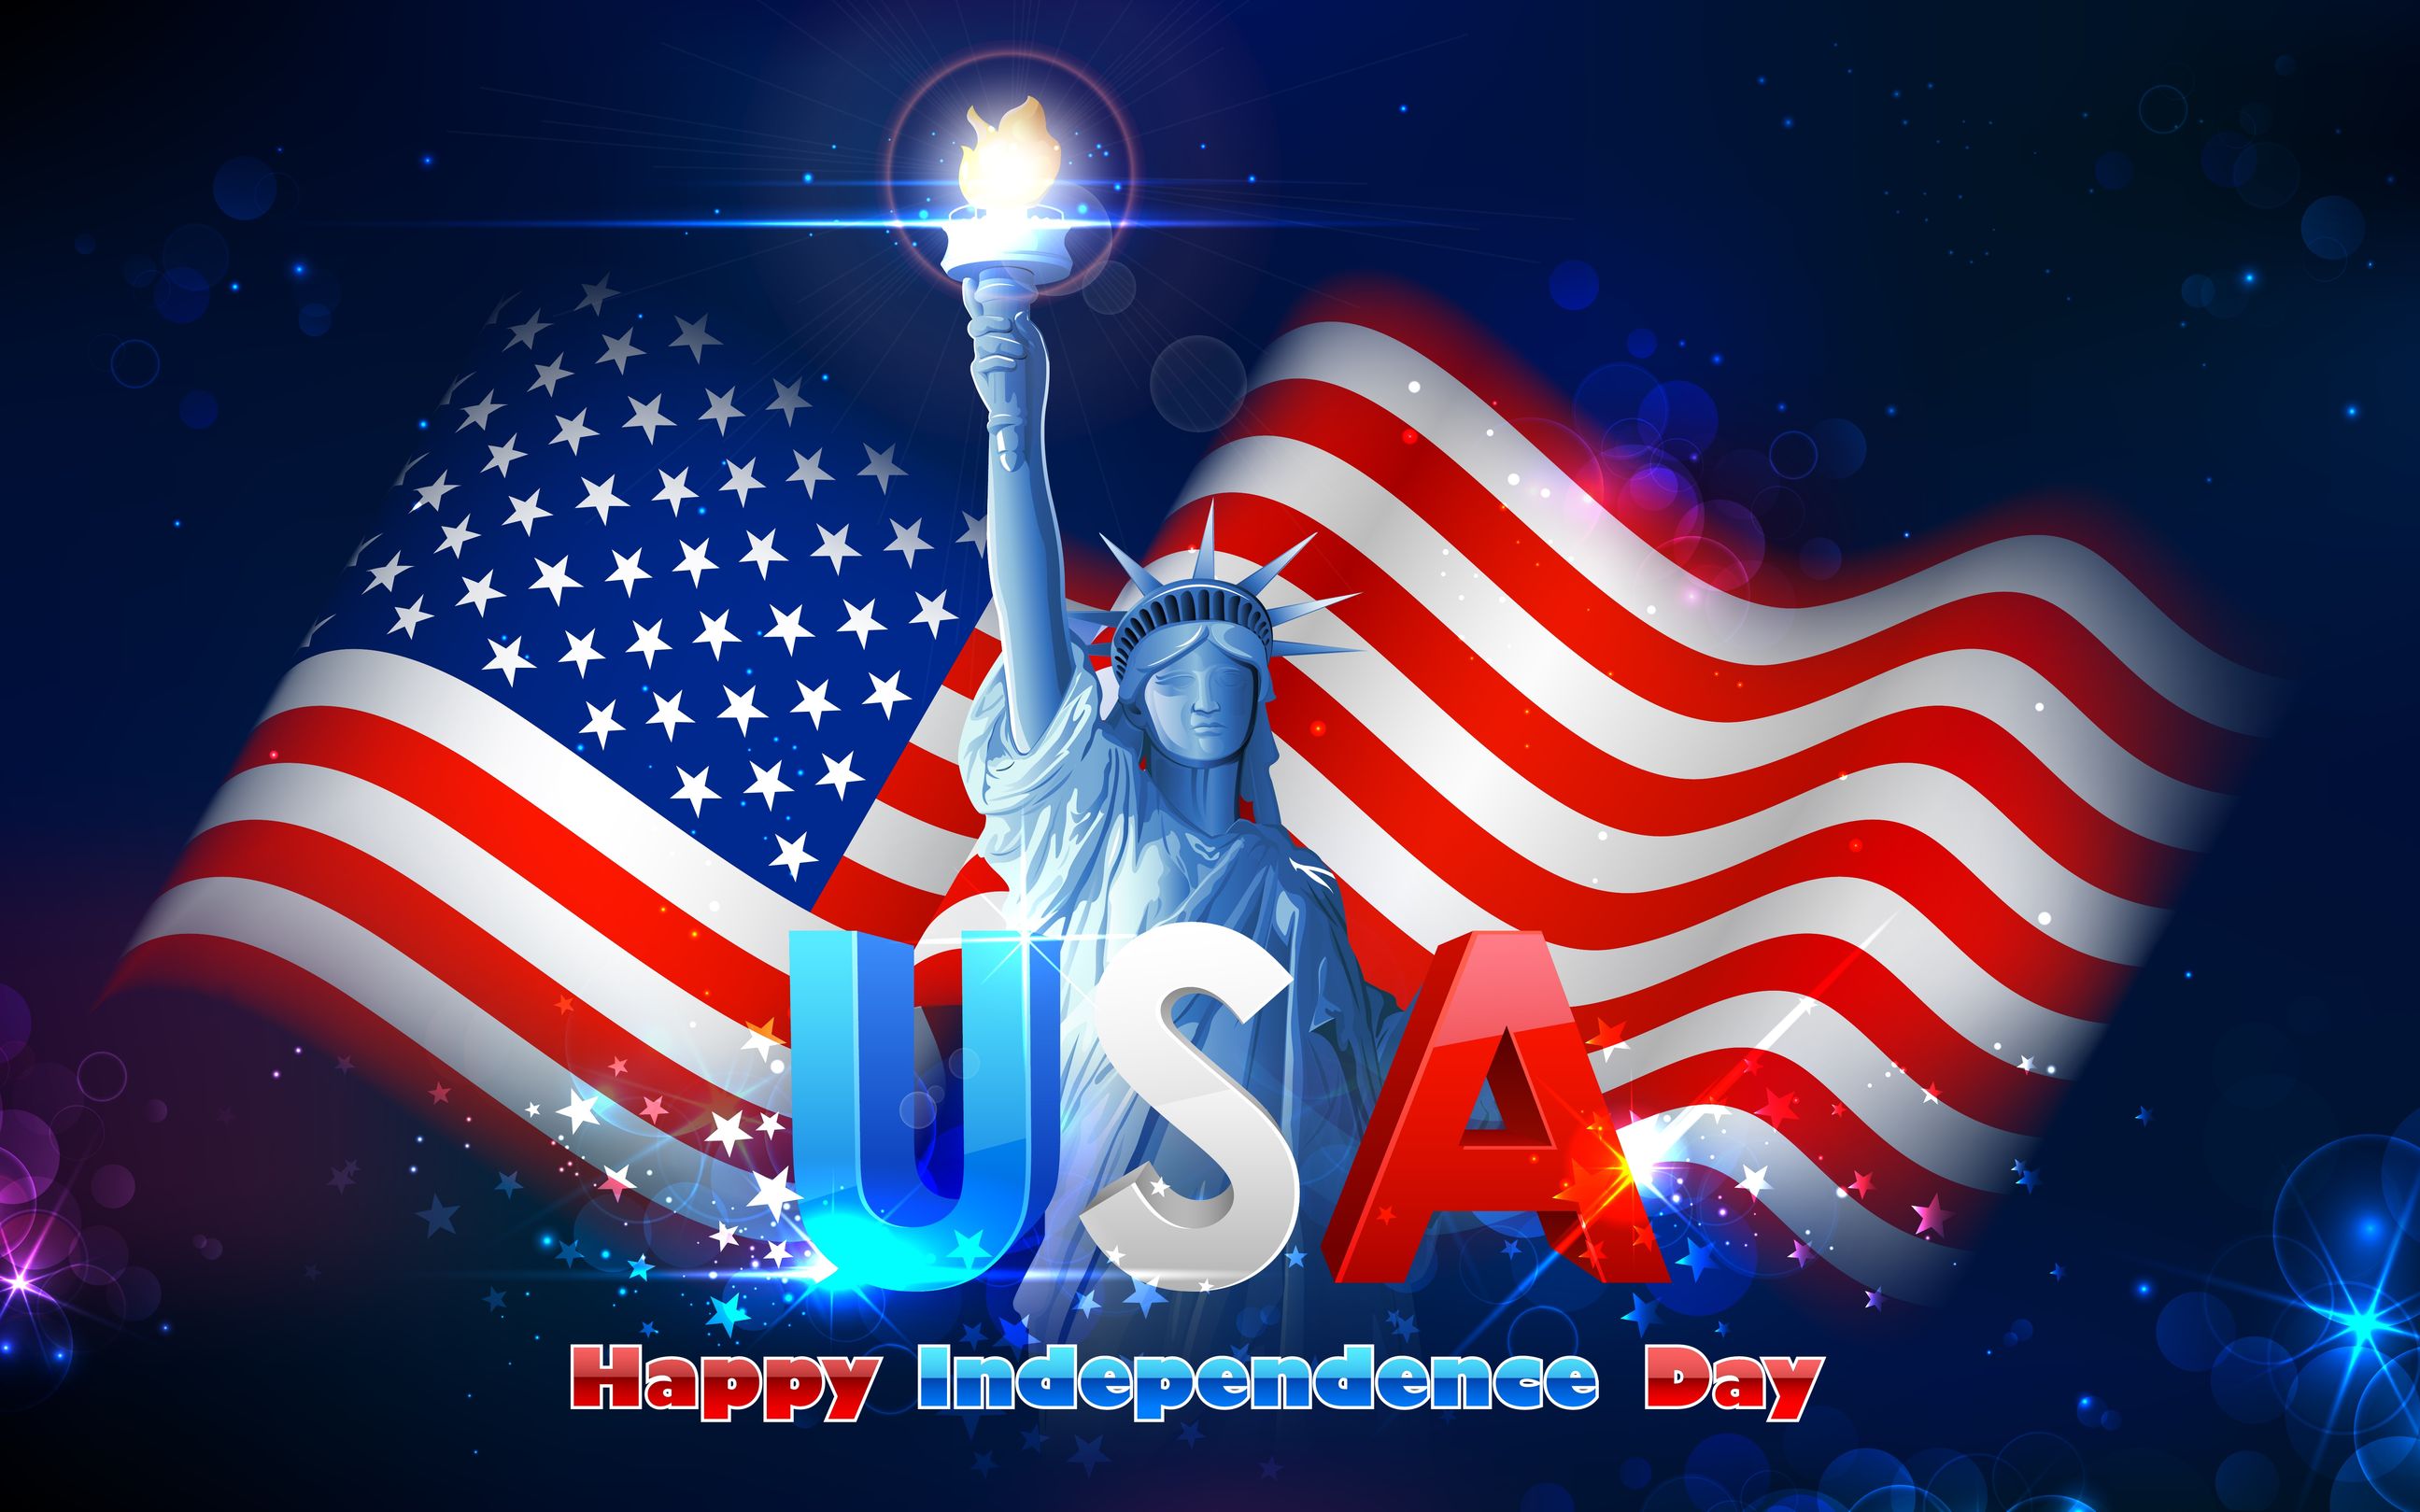 Independence Day USA Image Archives. Happy 4th of July 4th of July 2021 Image Photo Picture Pics Wallpaper, Happy 4th of July Quotes Greetings